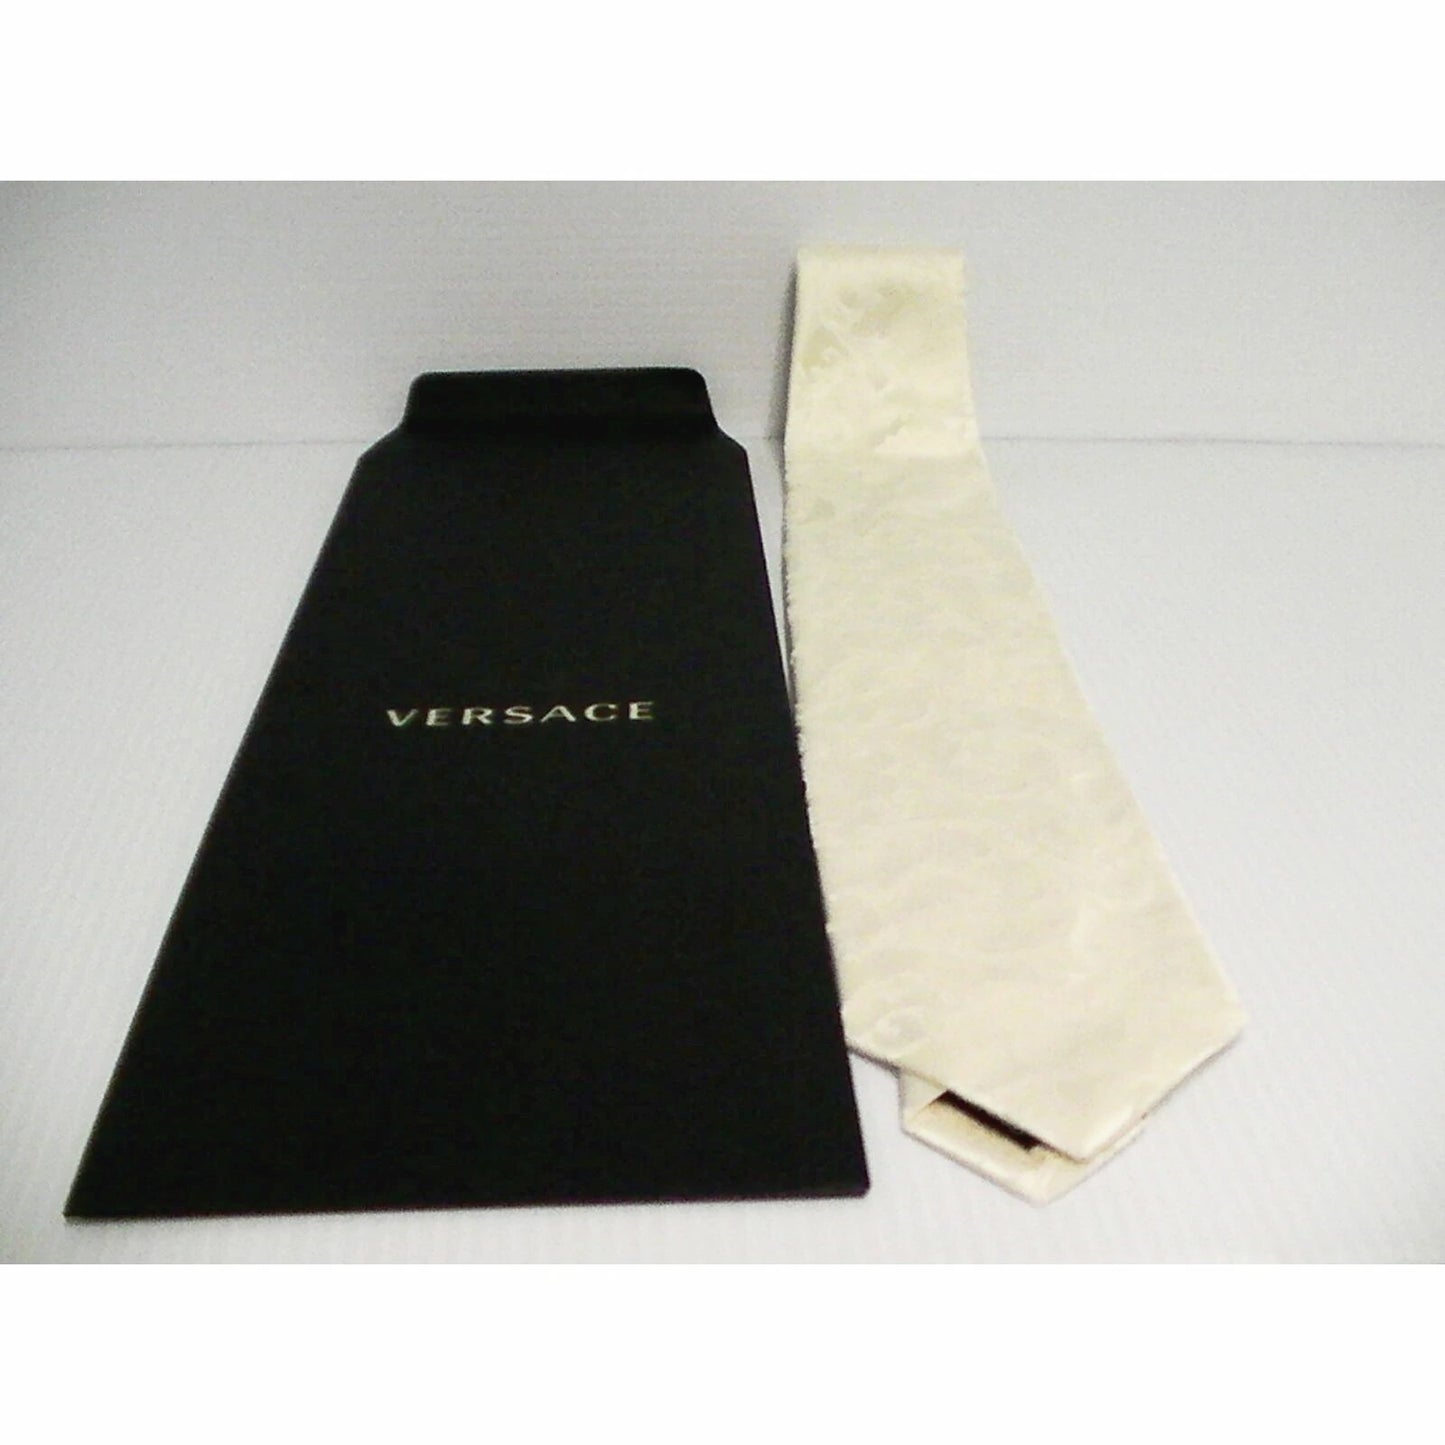 VERSACE MENS TIES MEDUSA 100% SILK OFF WHITE floral made in Italy